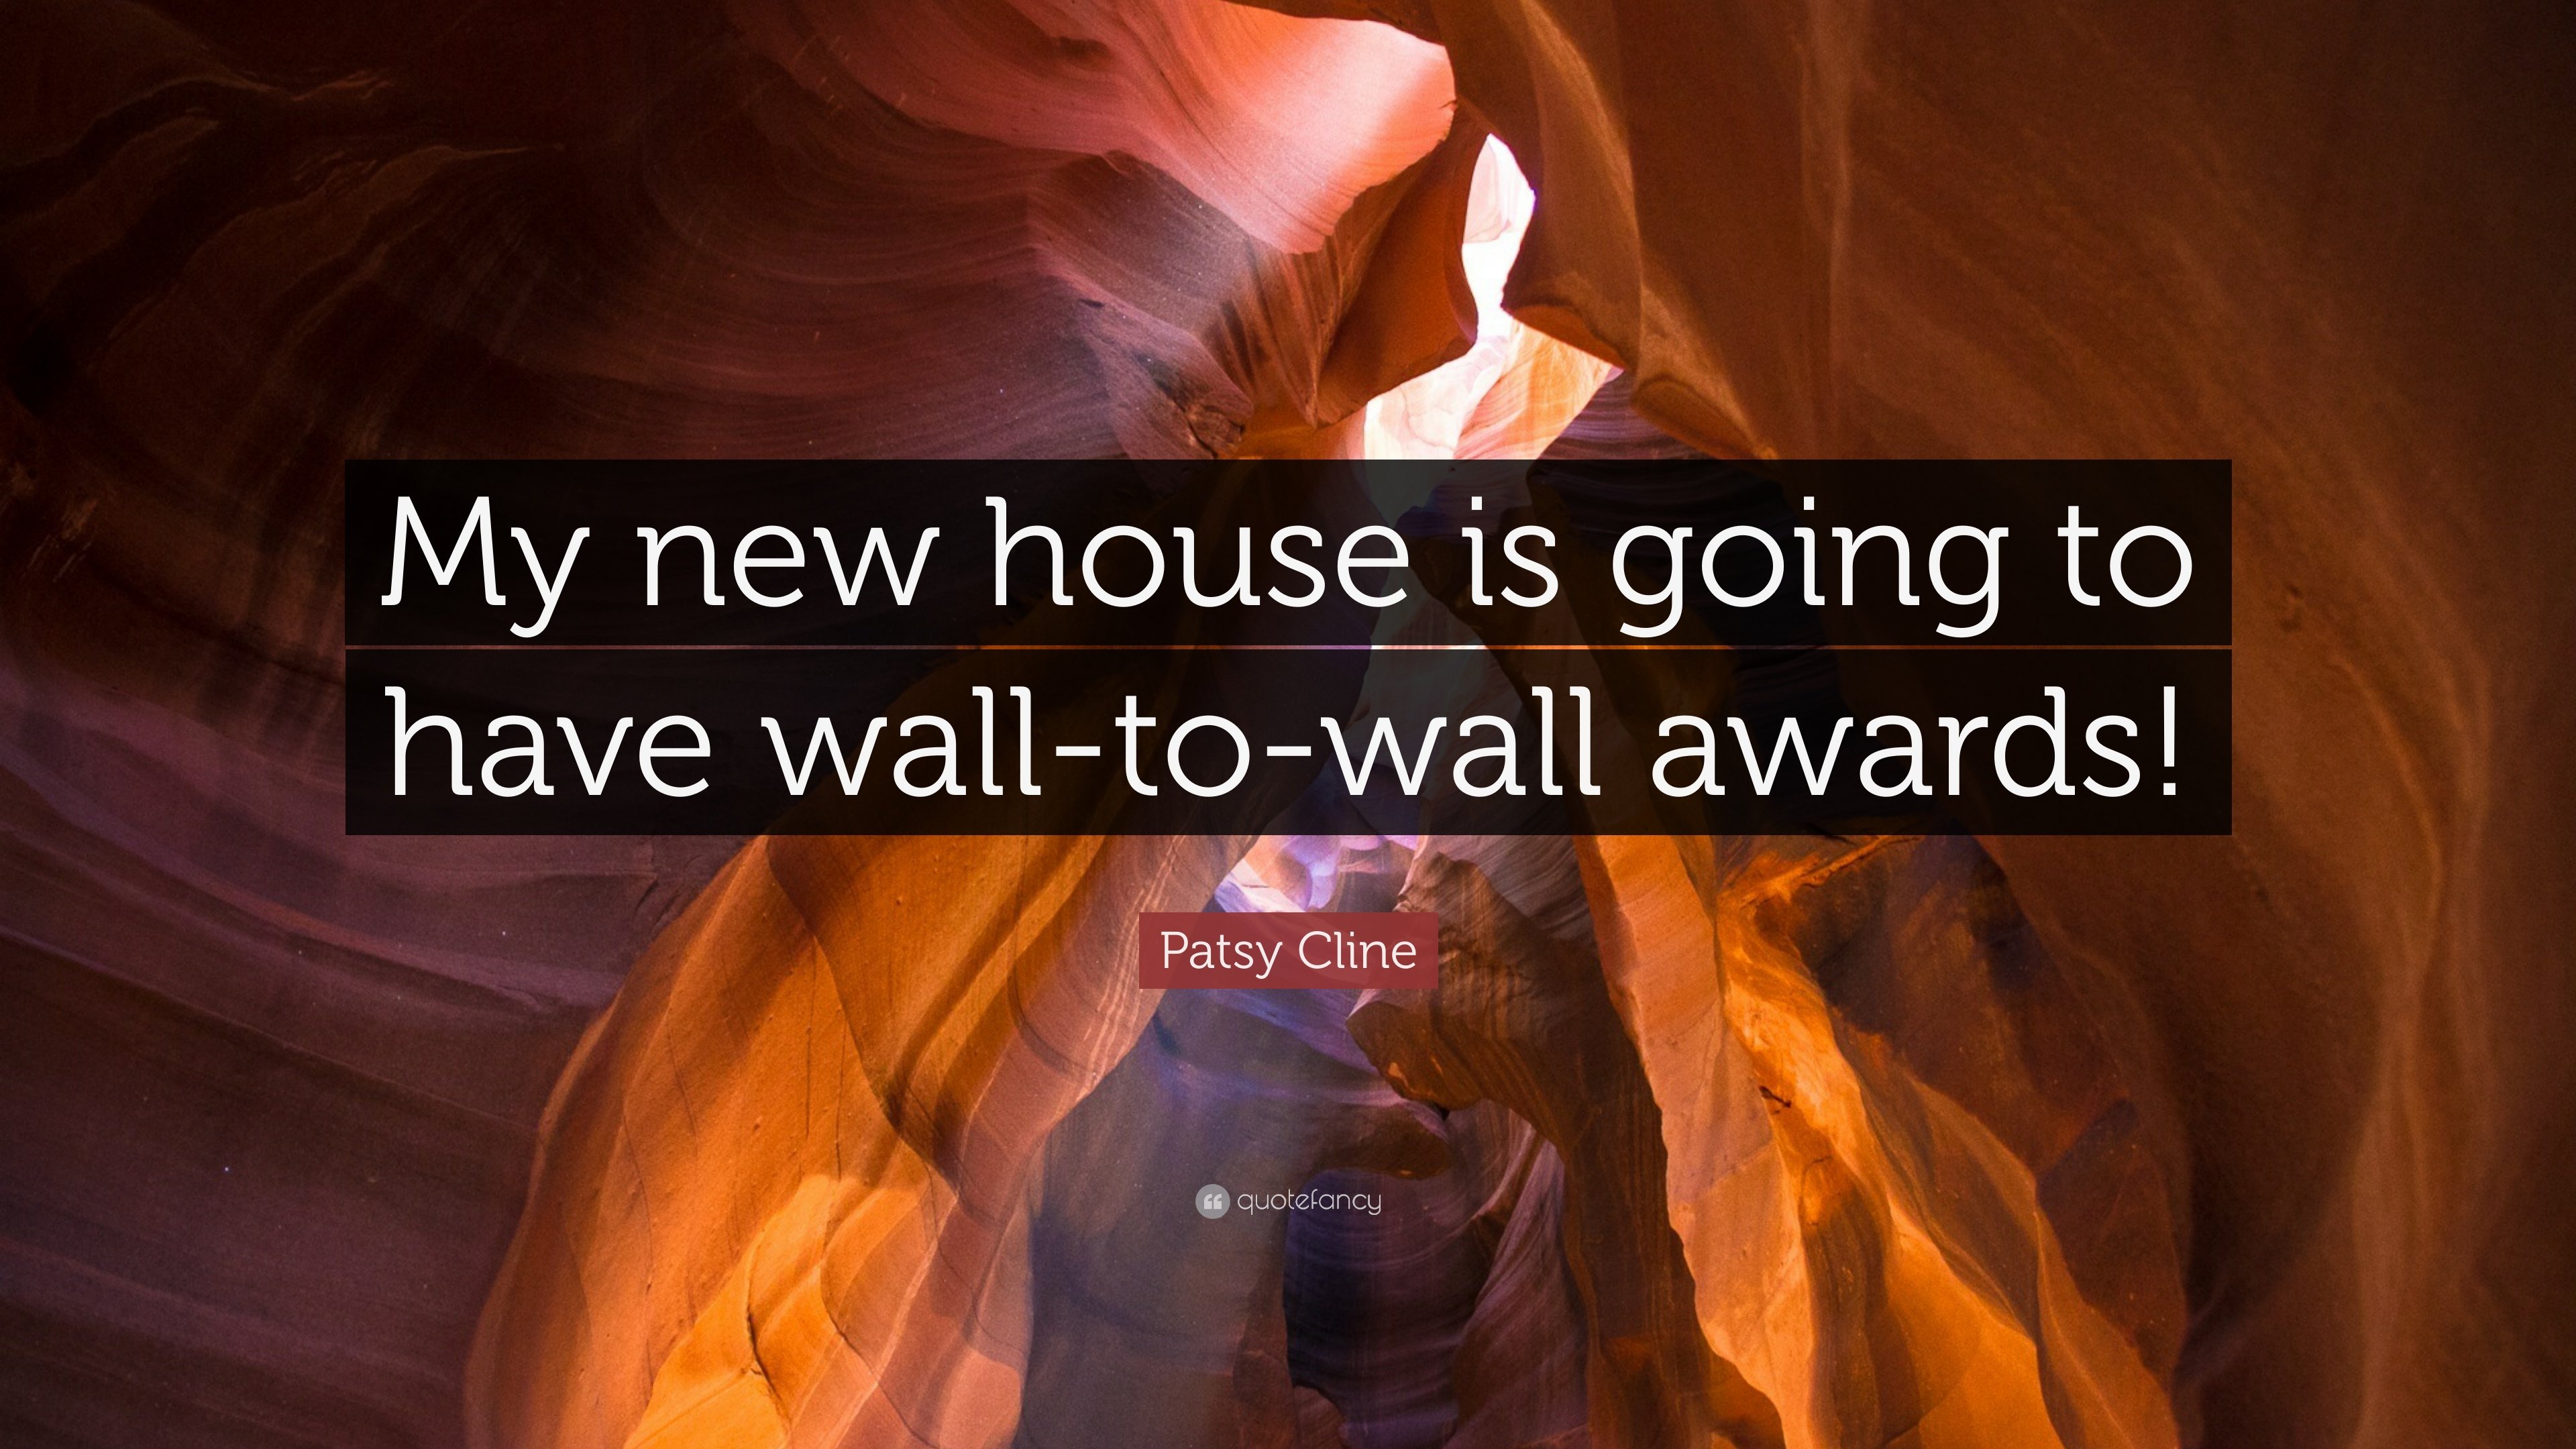 Patsy Cline Quote: “My New House Is Going To Have Wall To Wall